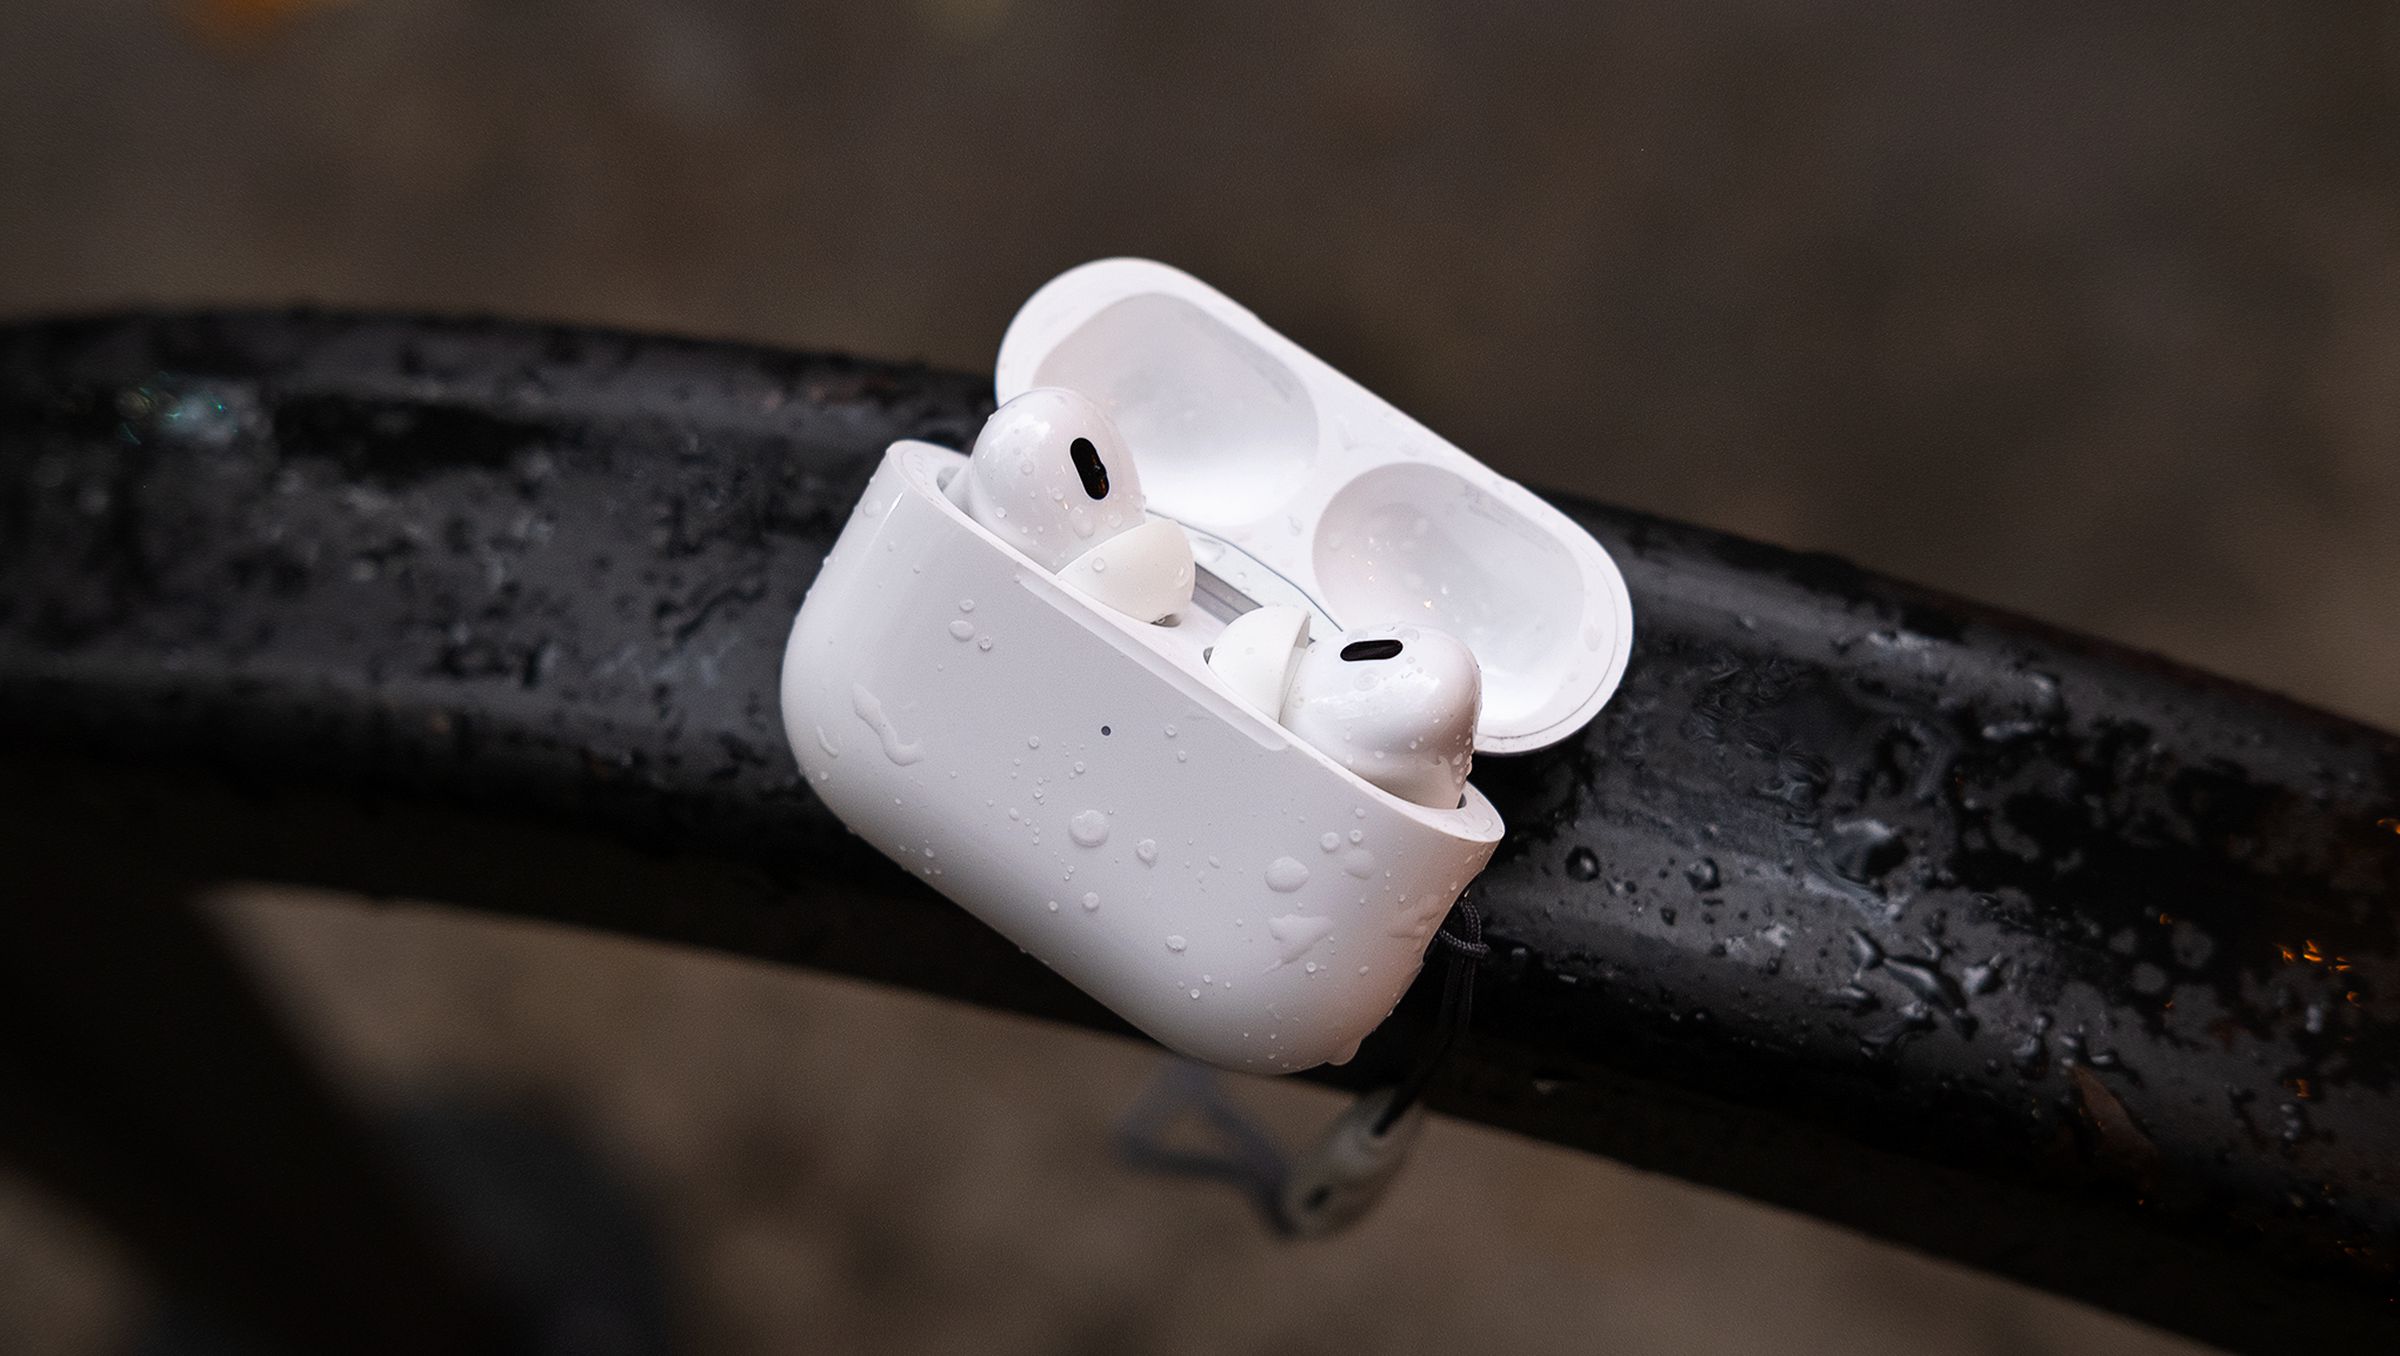 A pair of AirPods in an open charging case